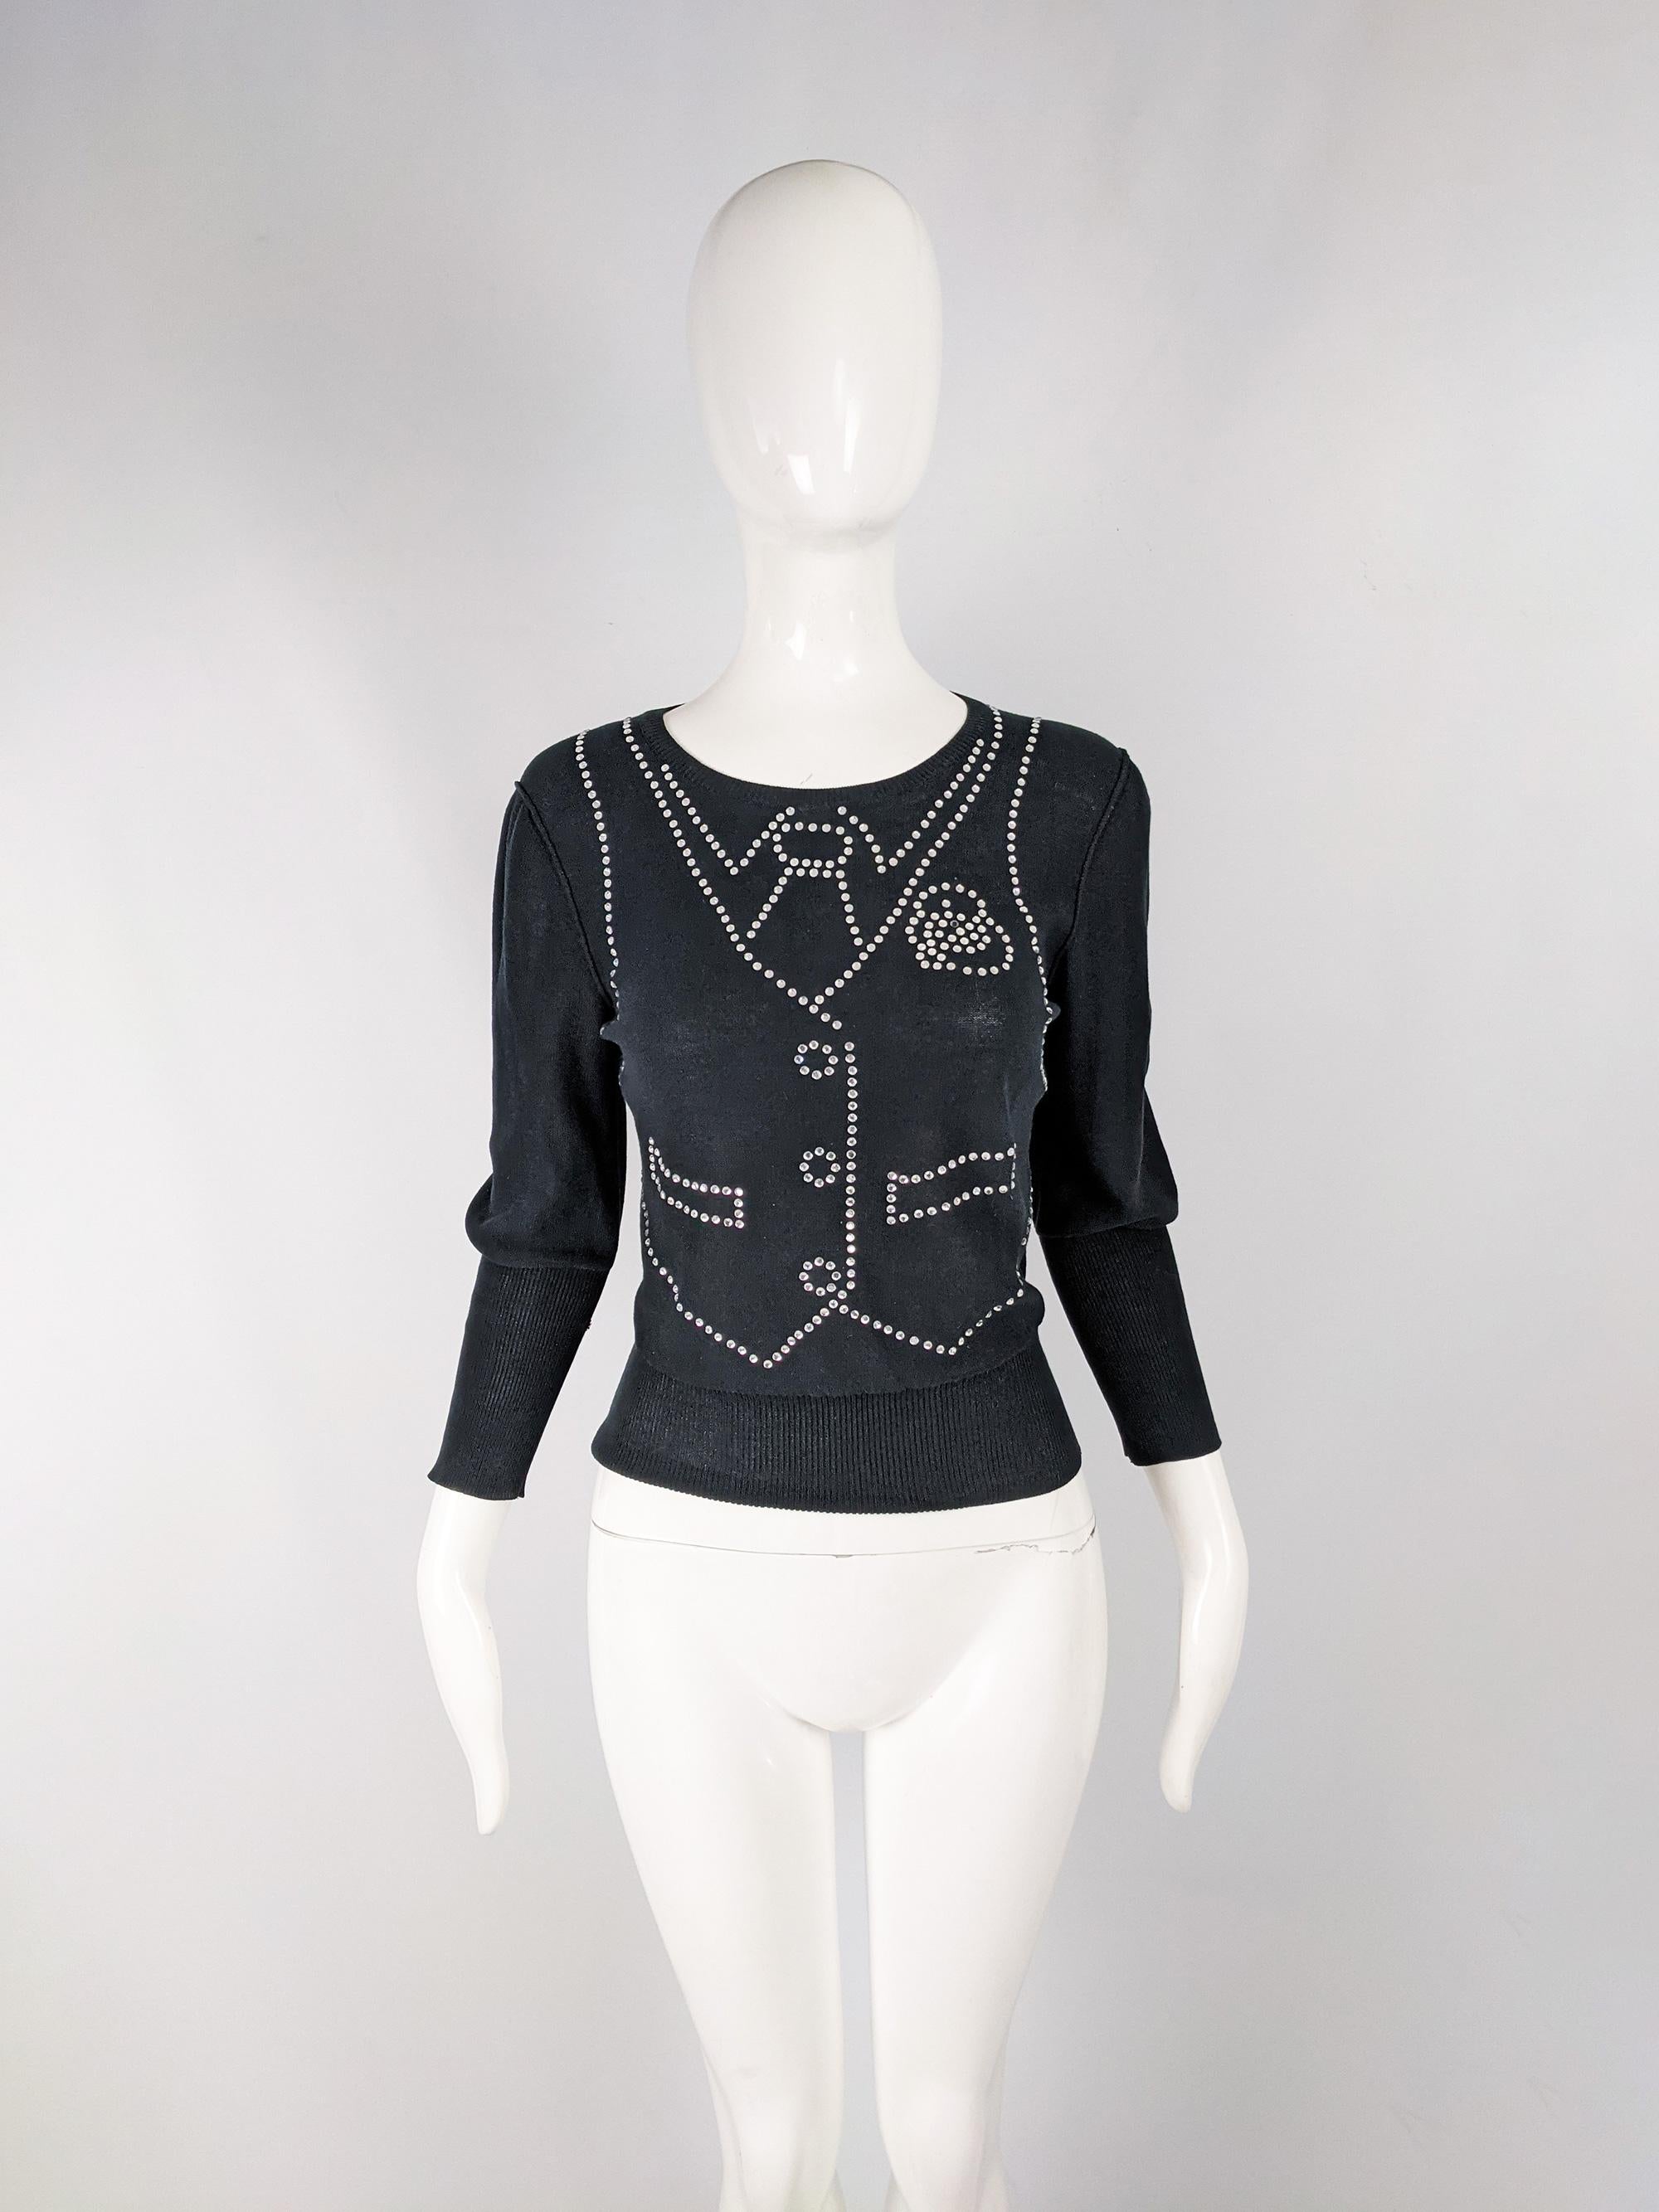 A cute vintage womens jumper from the 80s by luxury French fashion designer, Sonia Rykiel. In a black knit fabric with an amazing rhinestone pattern creating a trompe l'oeil effect of a waistcoat and shirt. It has long ribbed cuffs and a long ribbed